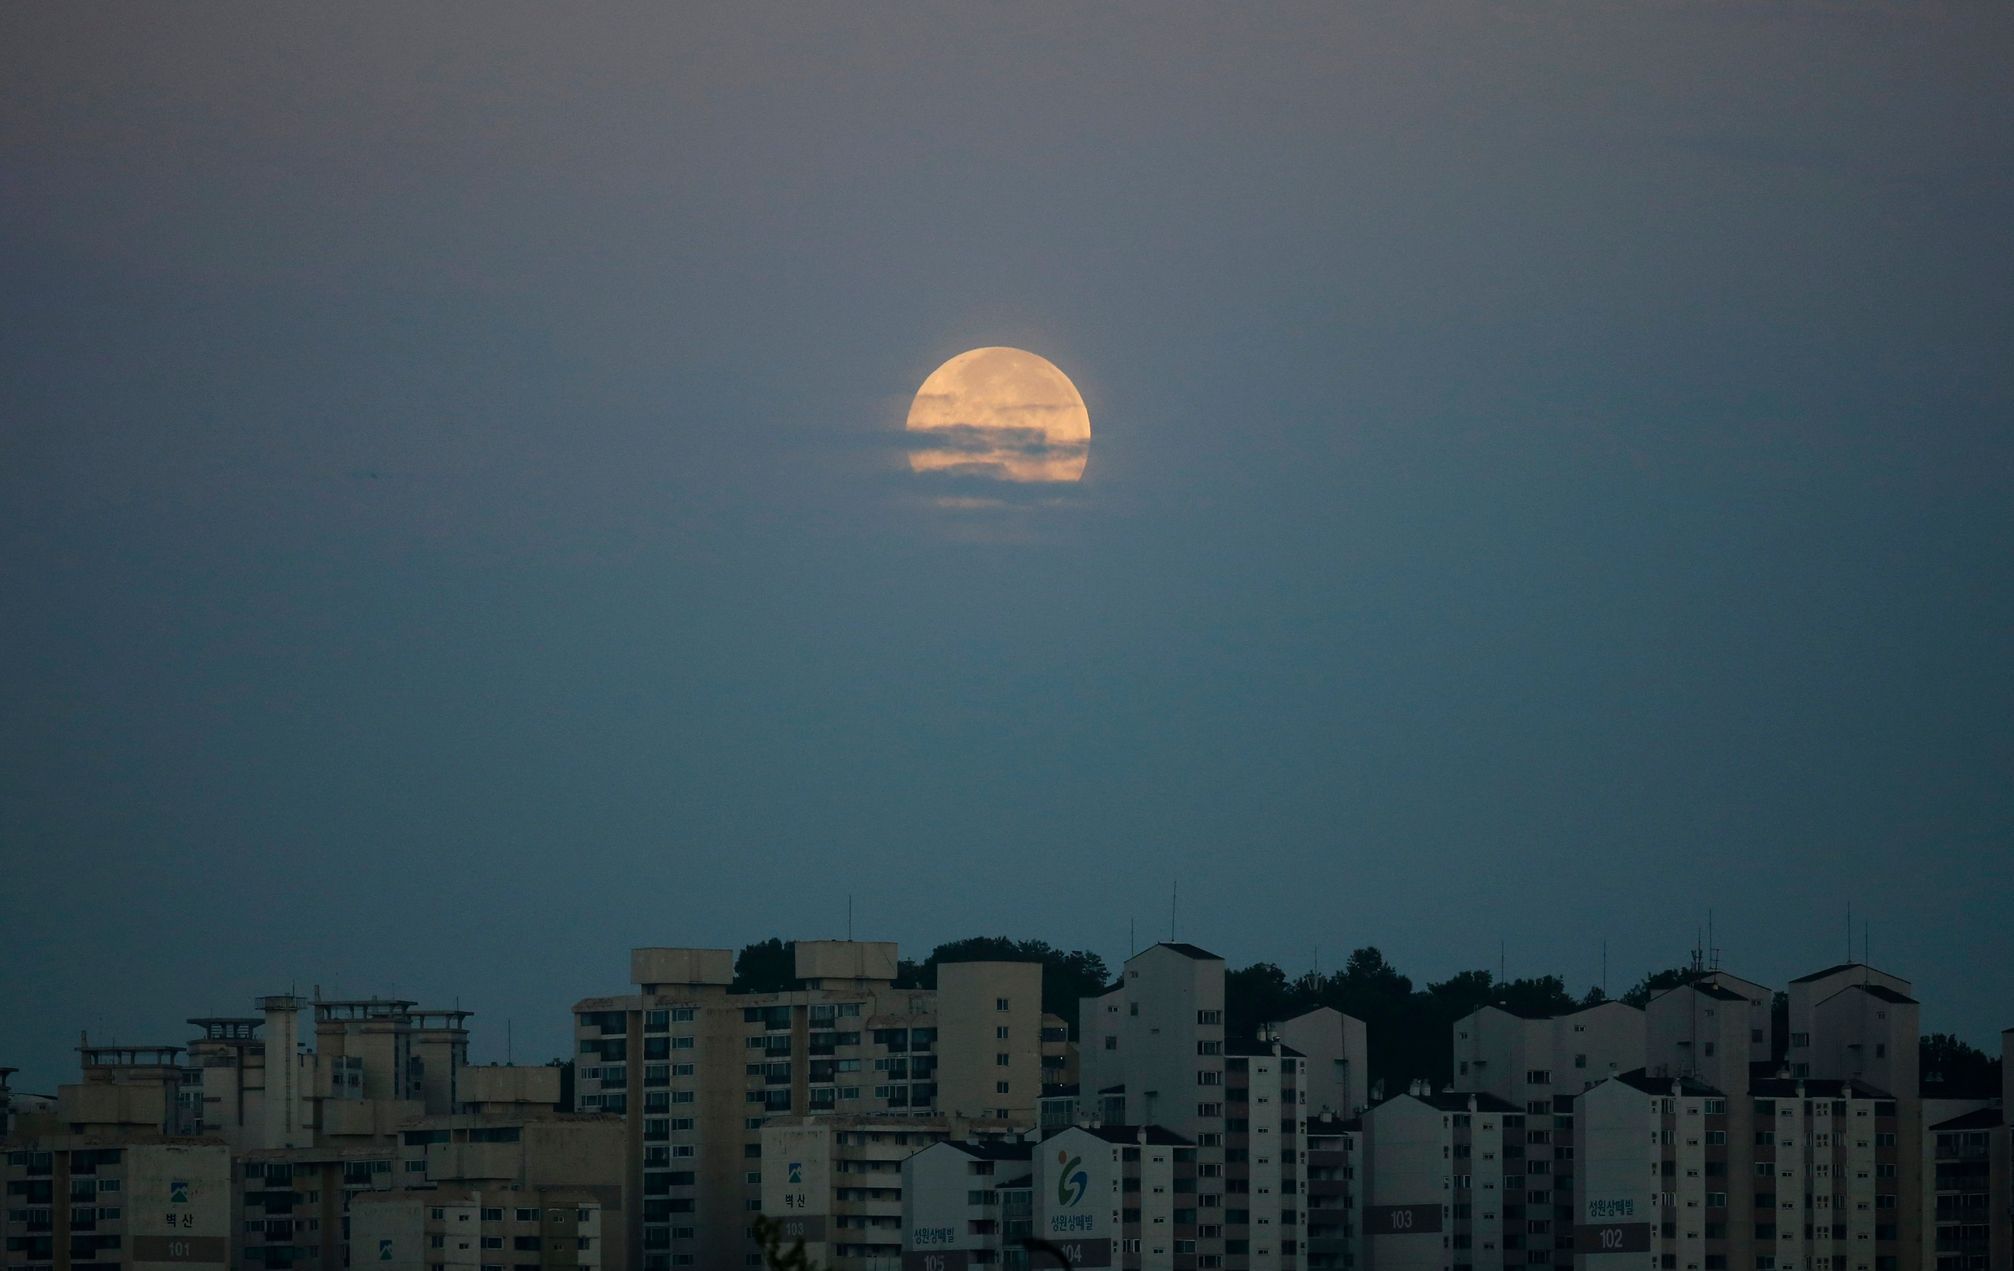 Supermoon hangs in the sky behind an apartment complex in Suwon